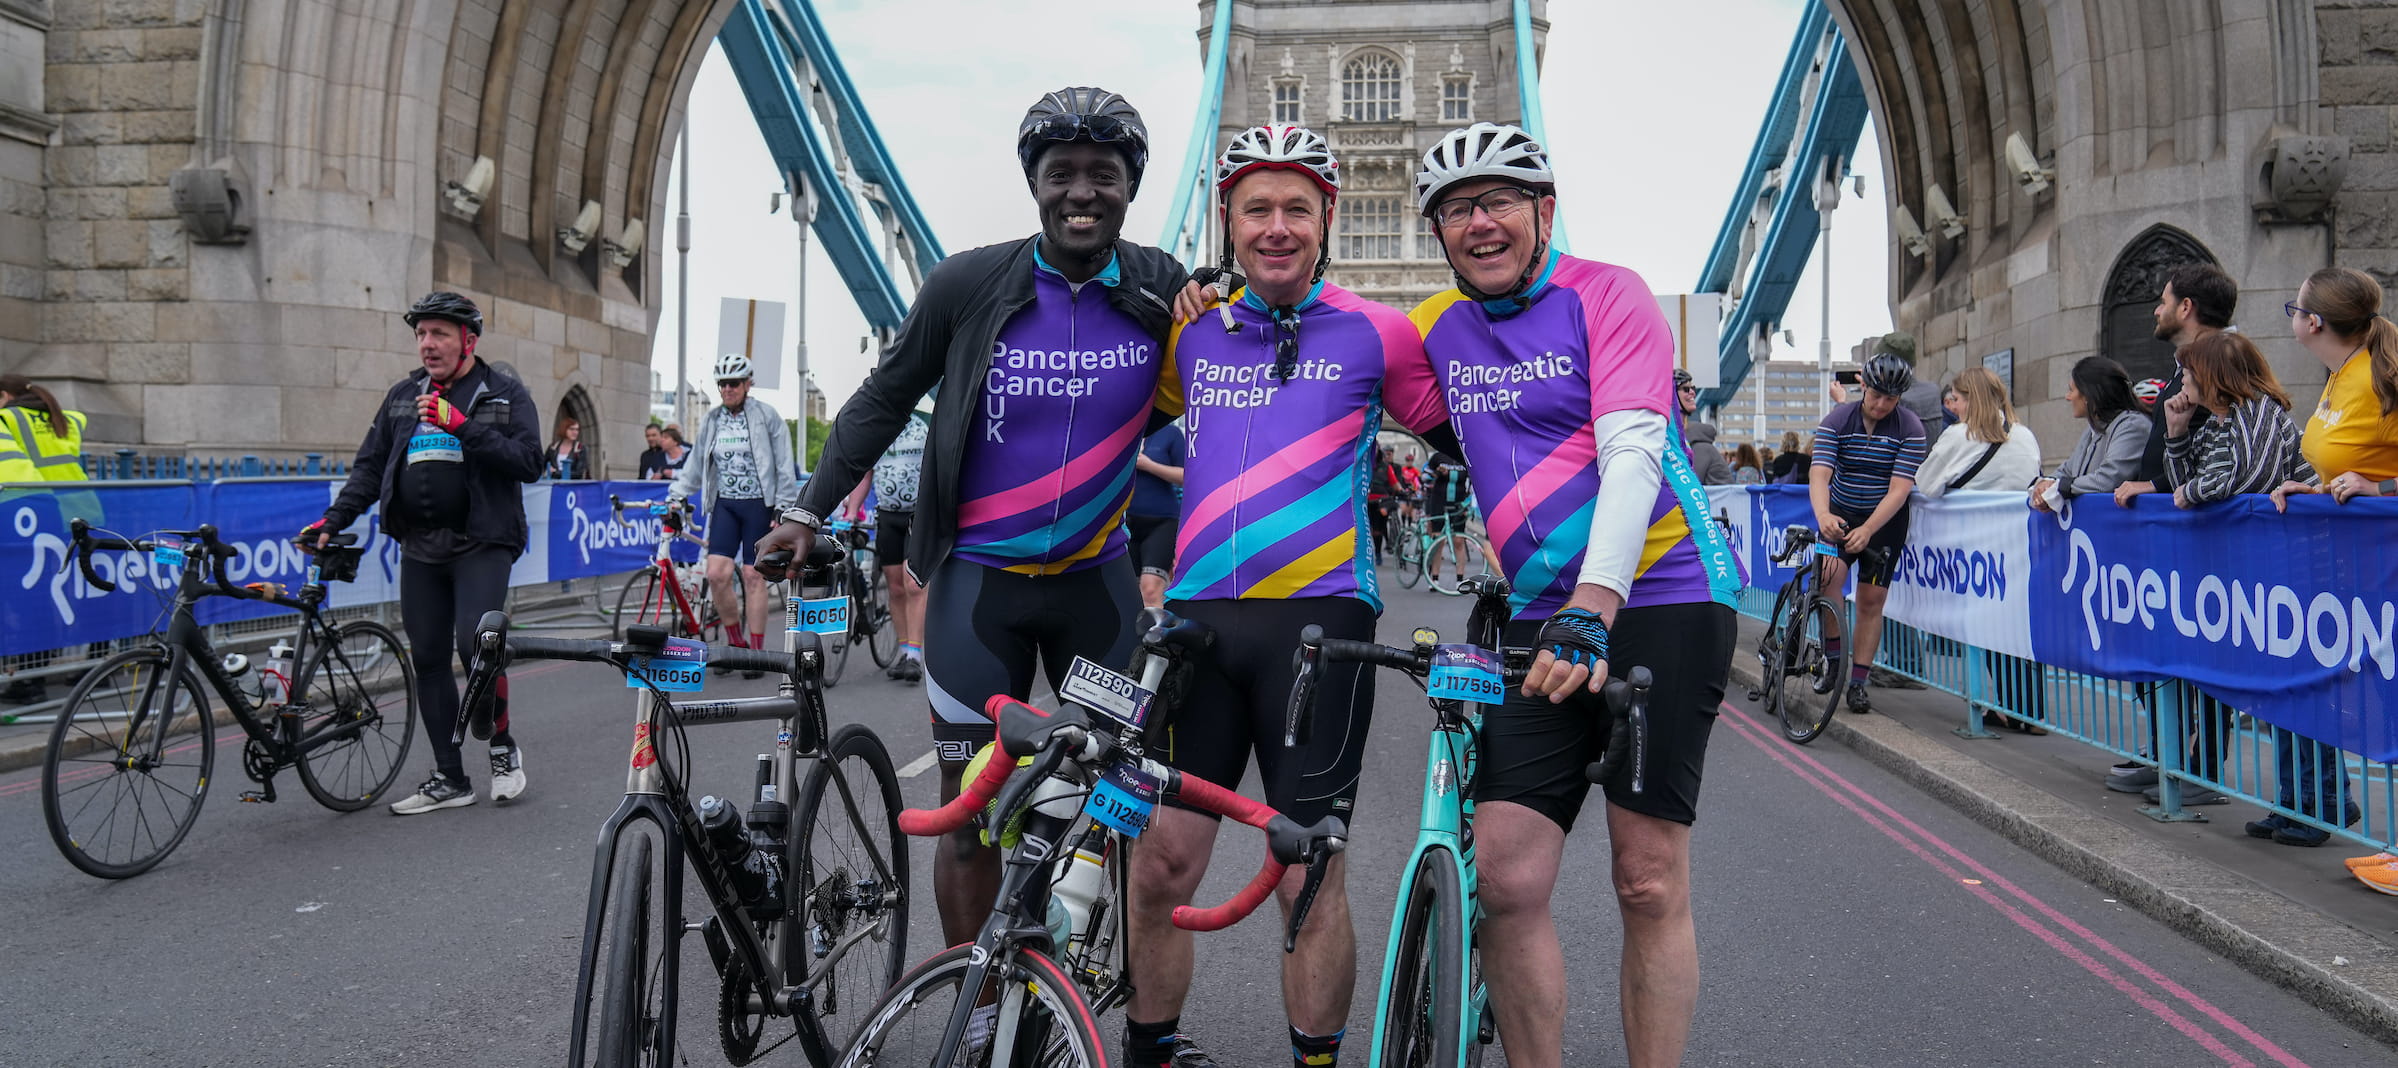 Charity riders at the Finish Line of the RideLondon sportive